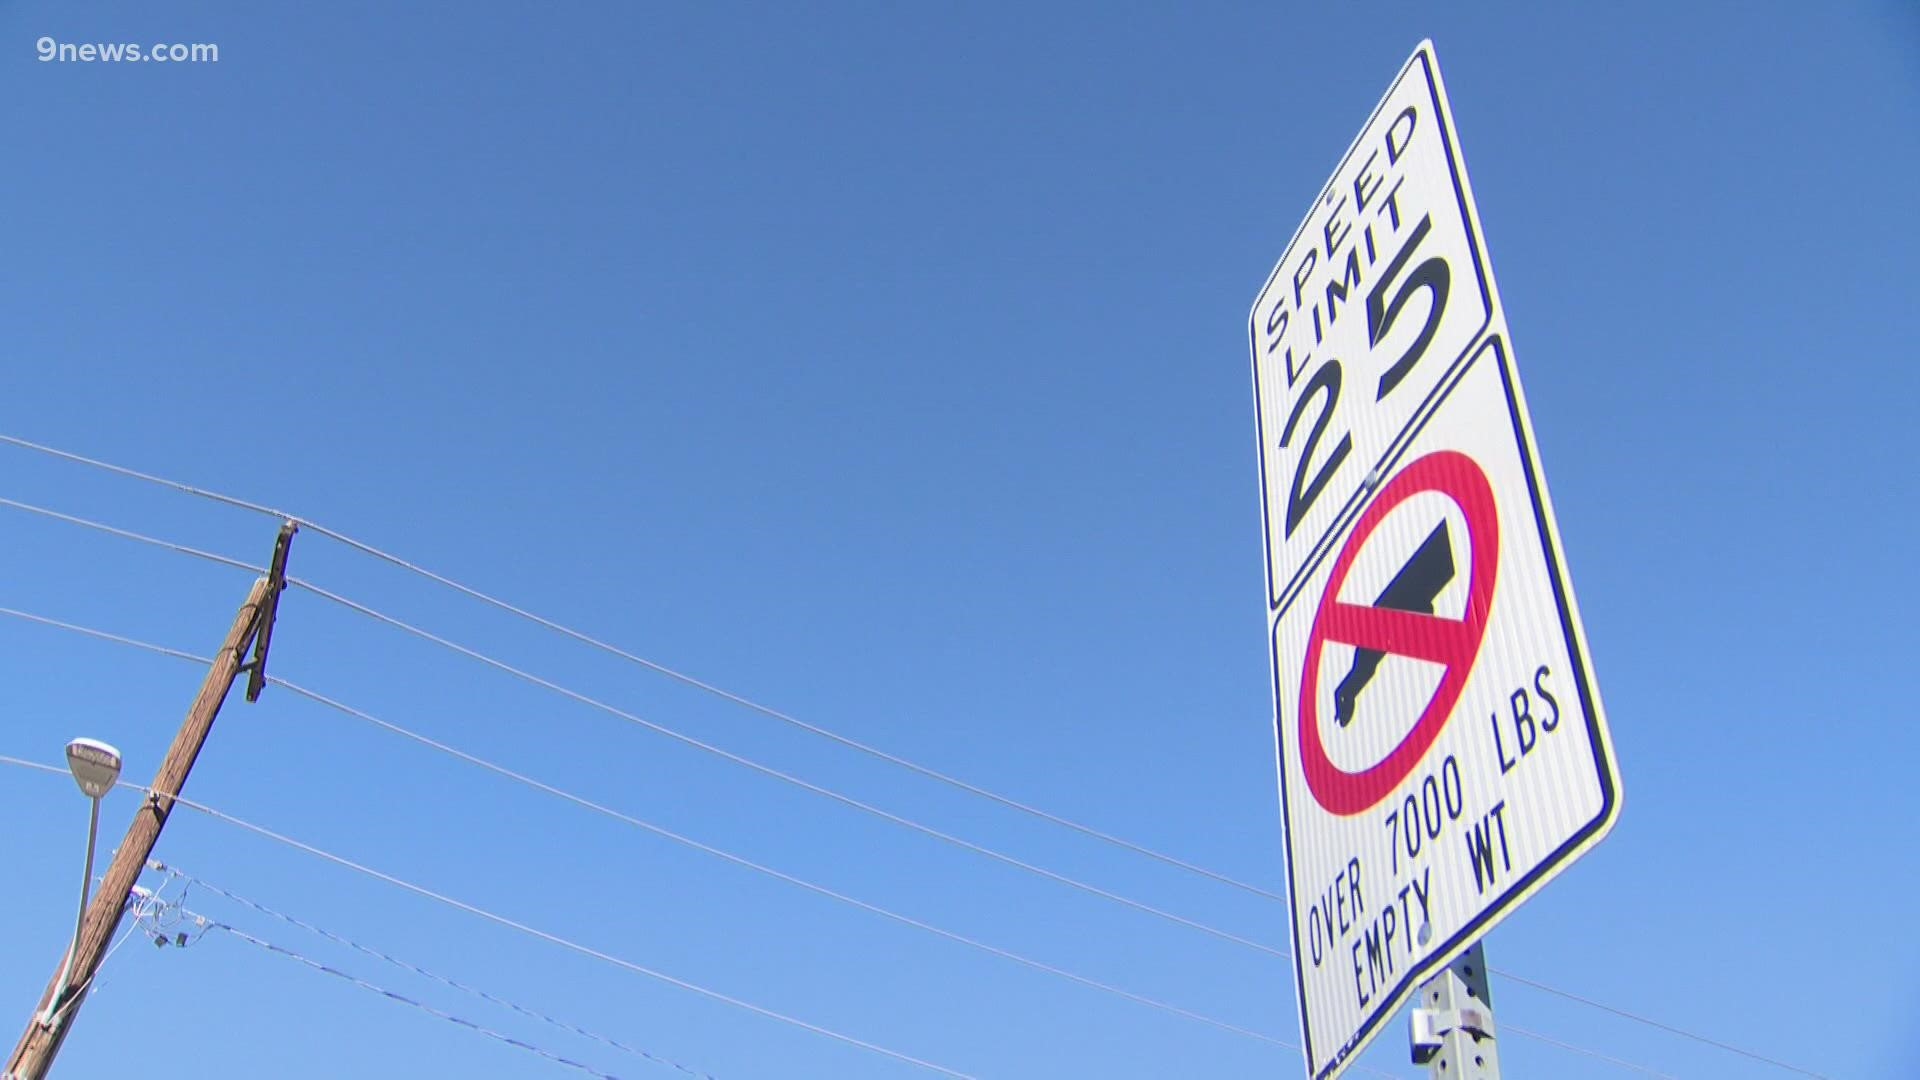 The council voted to lower the speed limit from 25 mph to 20 mph on city streets with no posted limit.